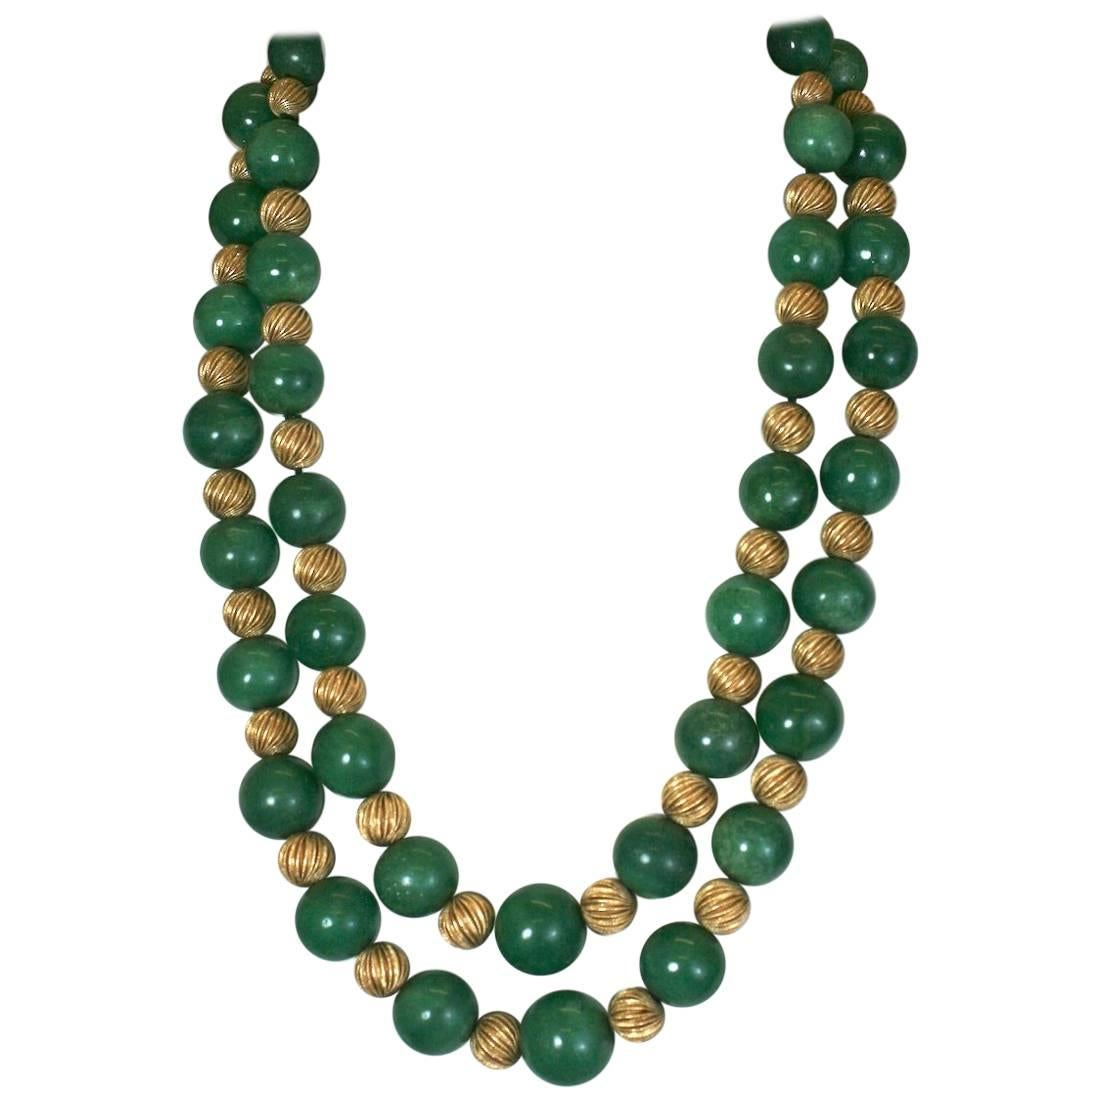 Adventurine and Ribbed Gold Bead Necklace